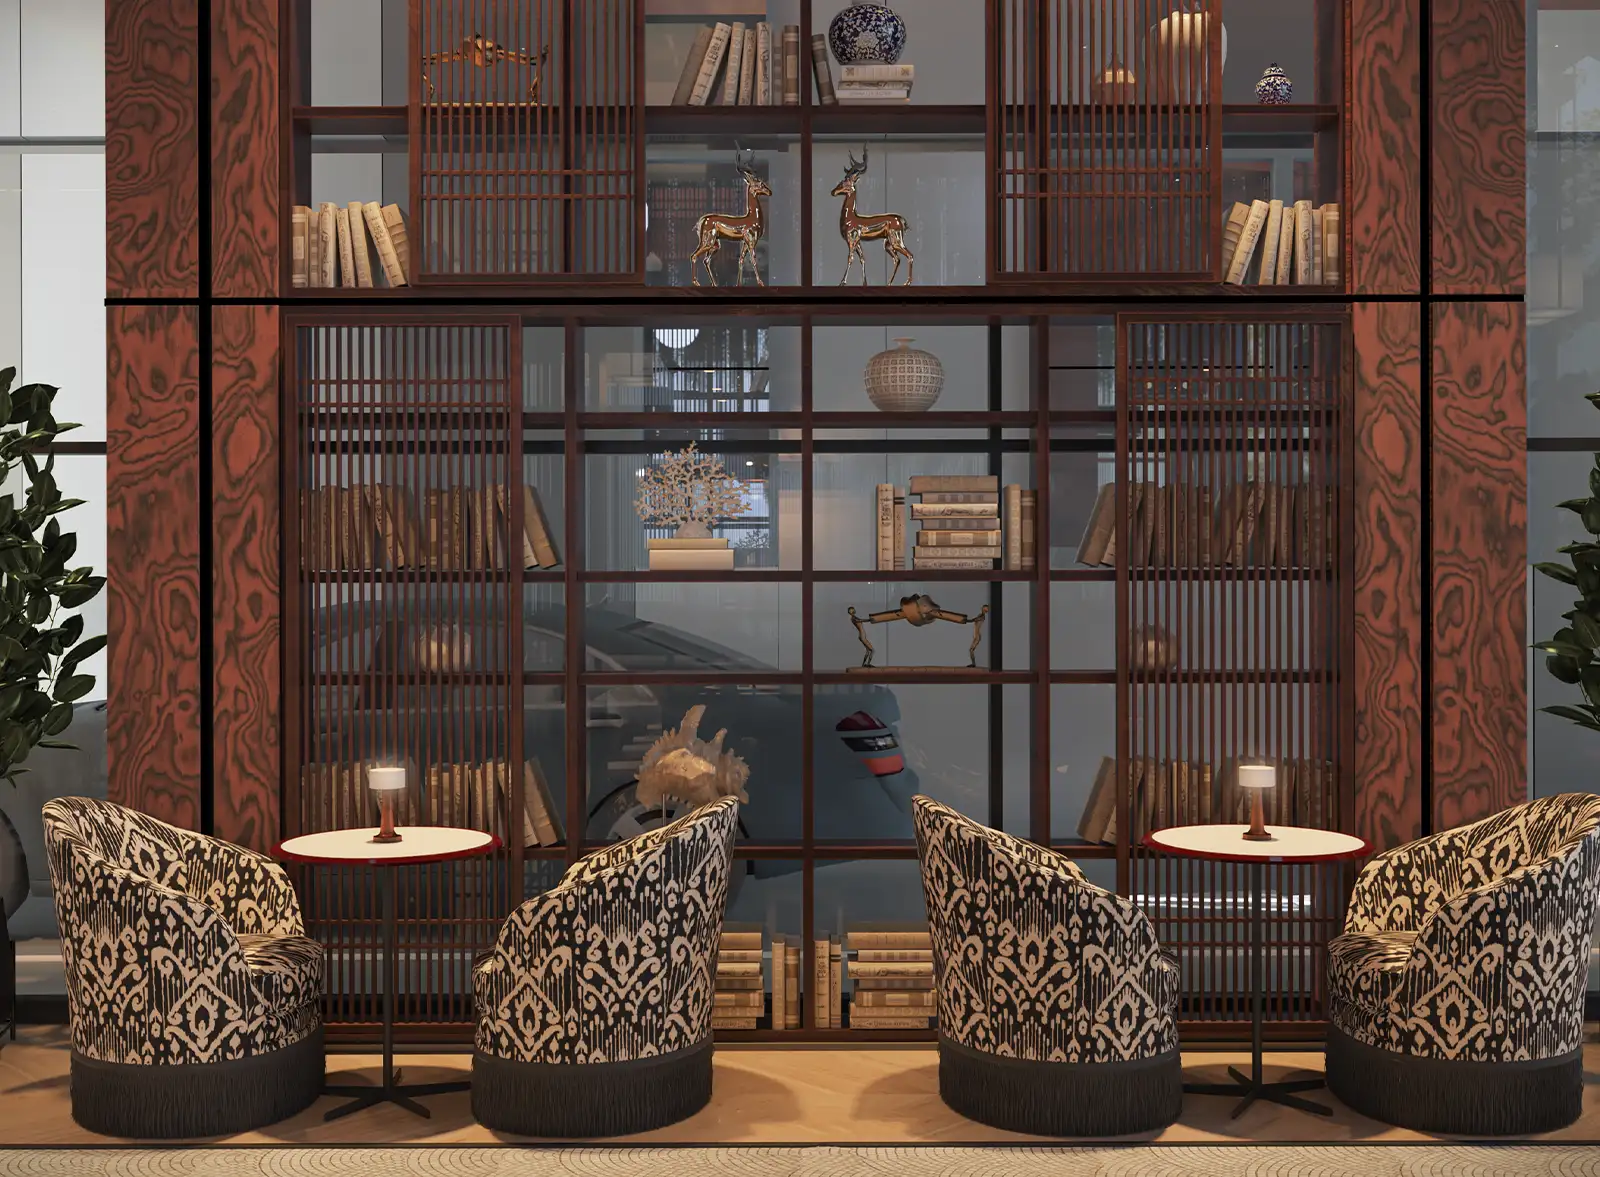 Sophisticated lounge area in a library setting with rich wooden bookshelves, patterned armchairs, and subtle lighting, creating an intimate space for reading and relaxation amidst a curated collection of books and artifacts.